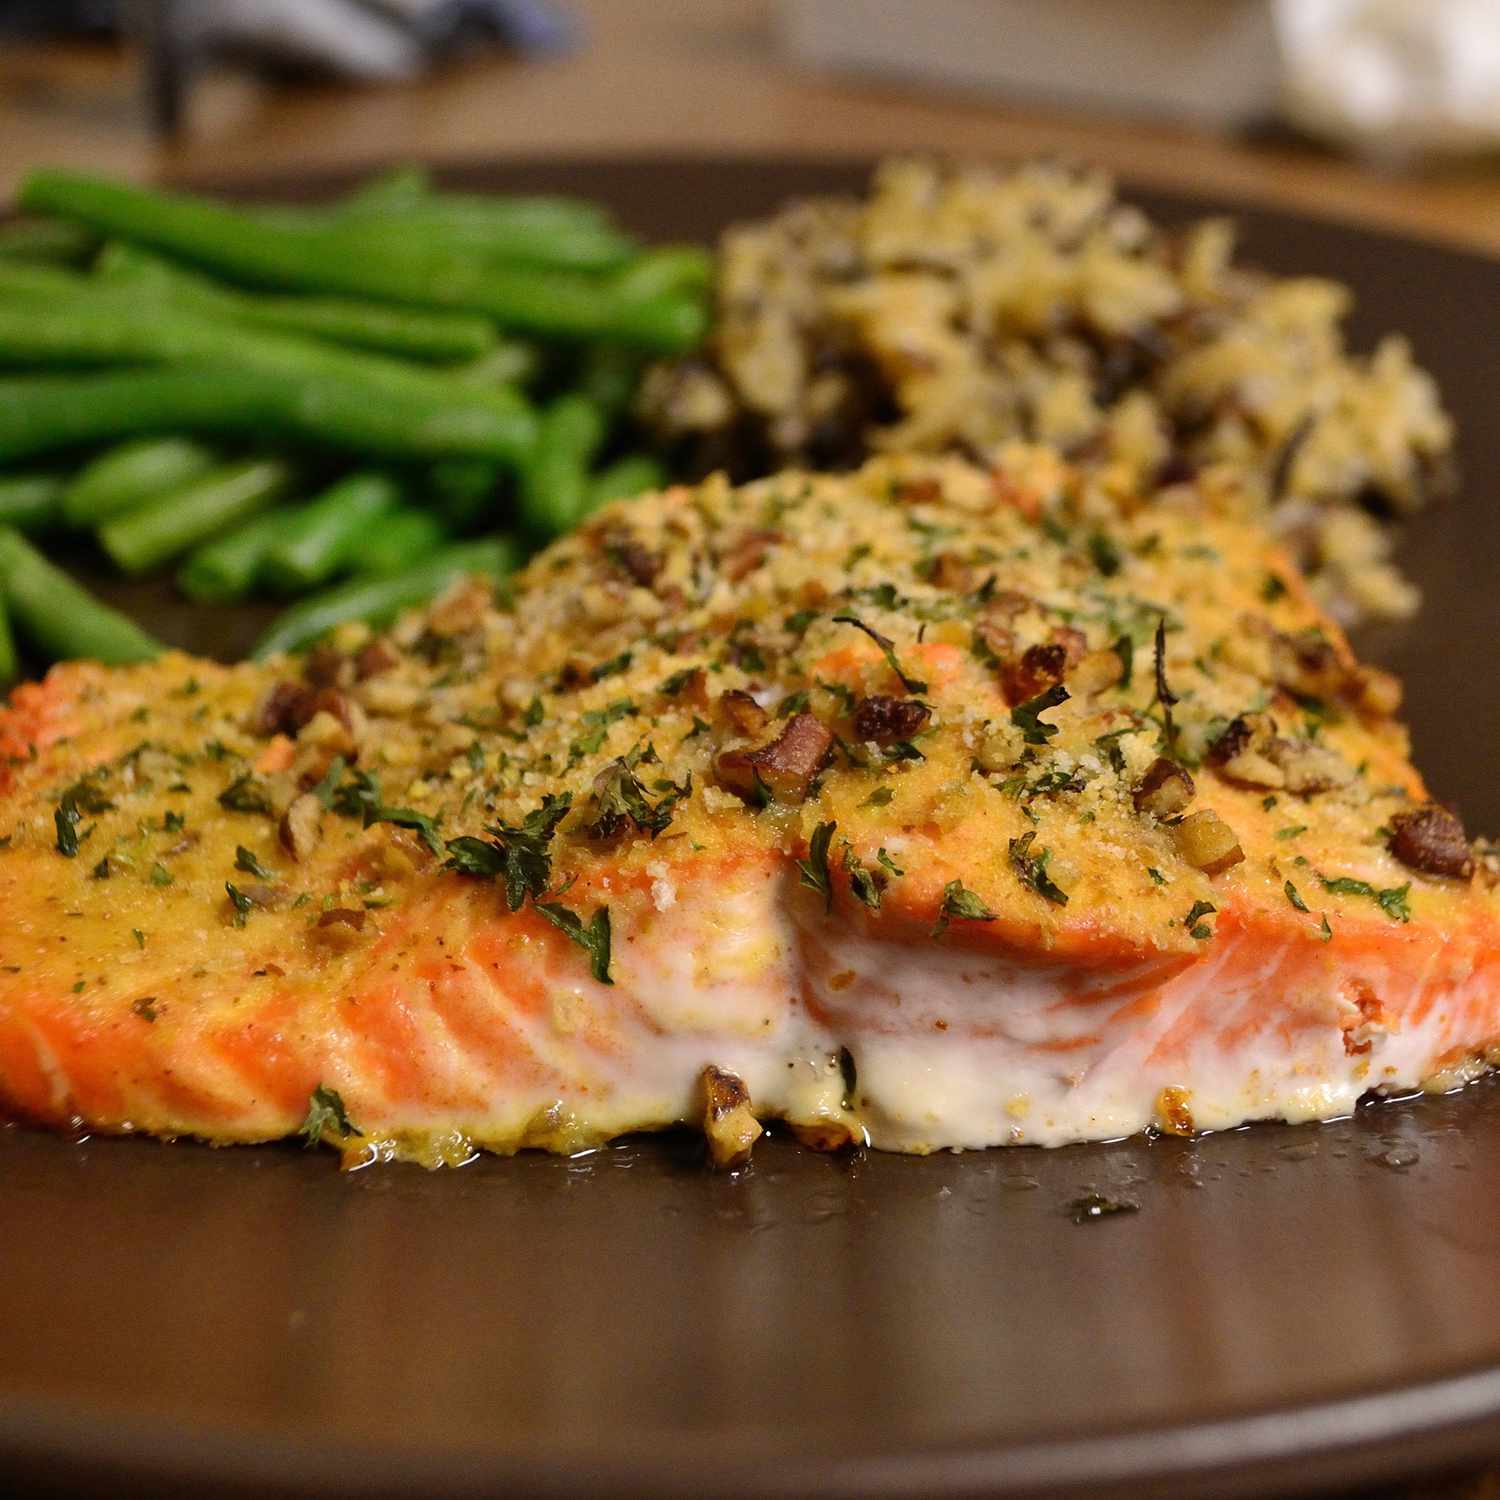 close up view of a Baked Dijon Salmon fillet with wild rice and green bean on a plate